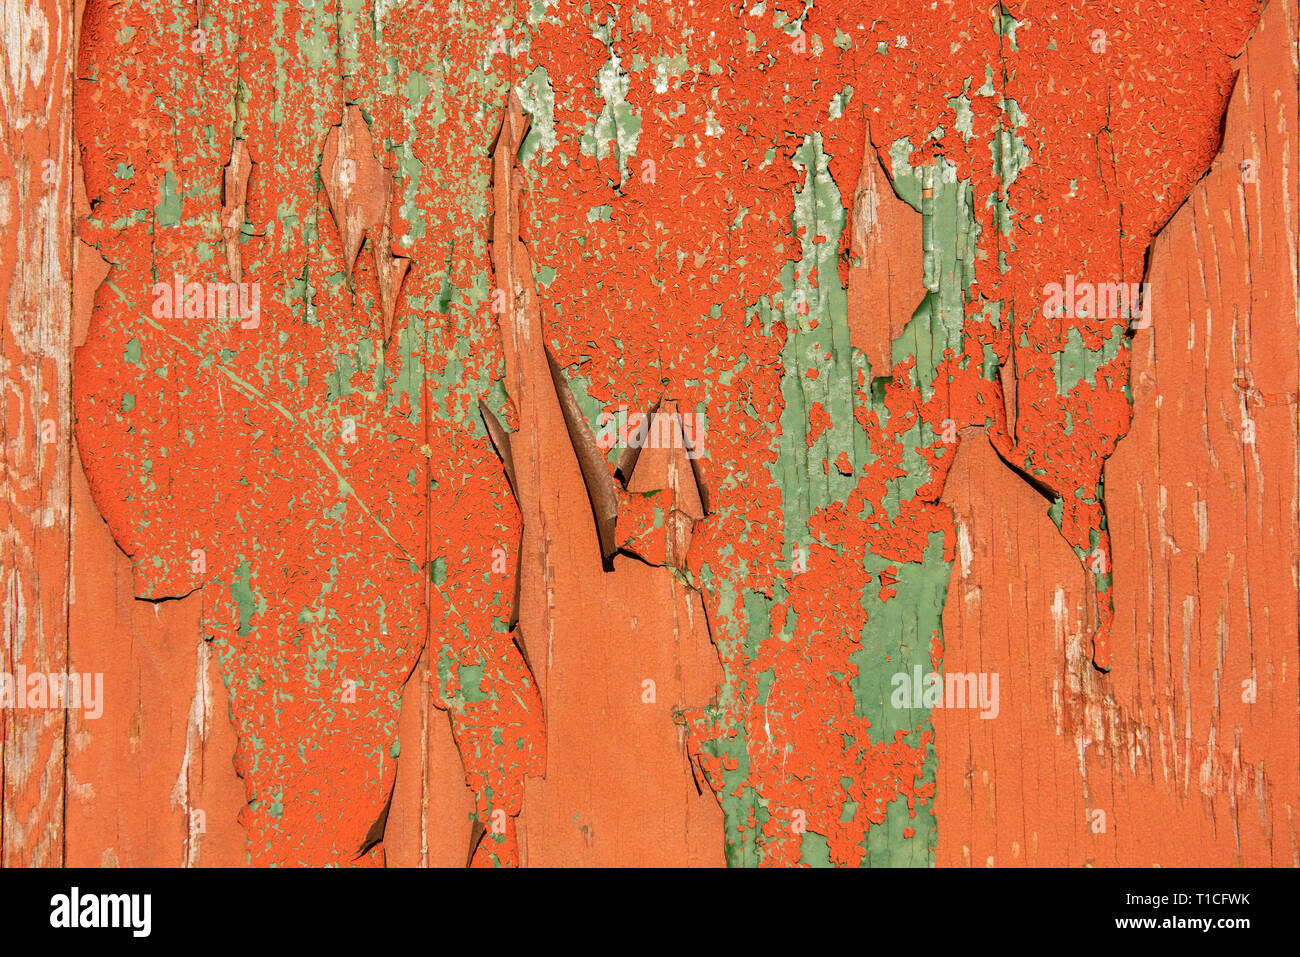 Old orange and green paint flaking off a wooden surface Stock Photo